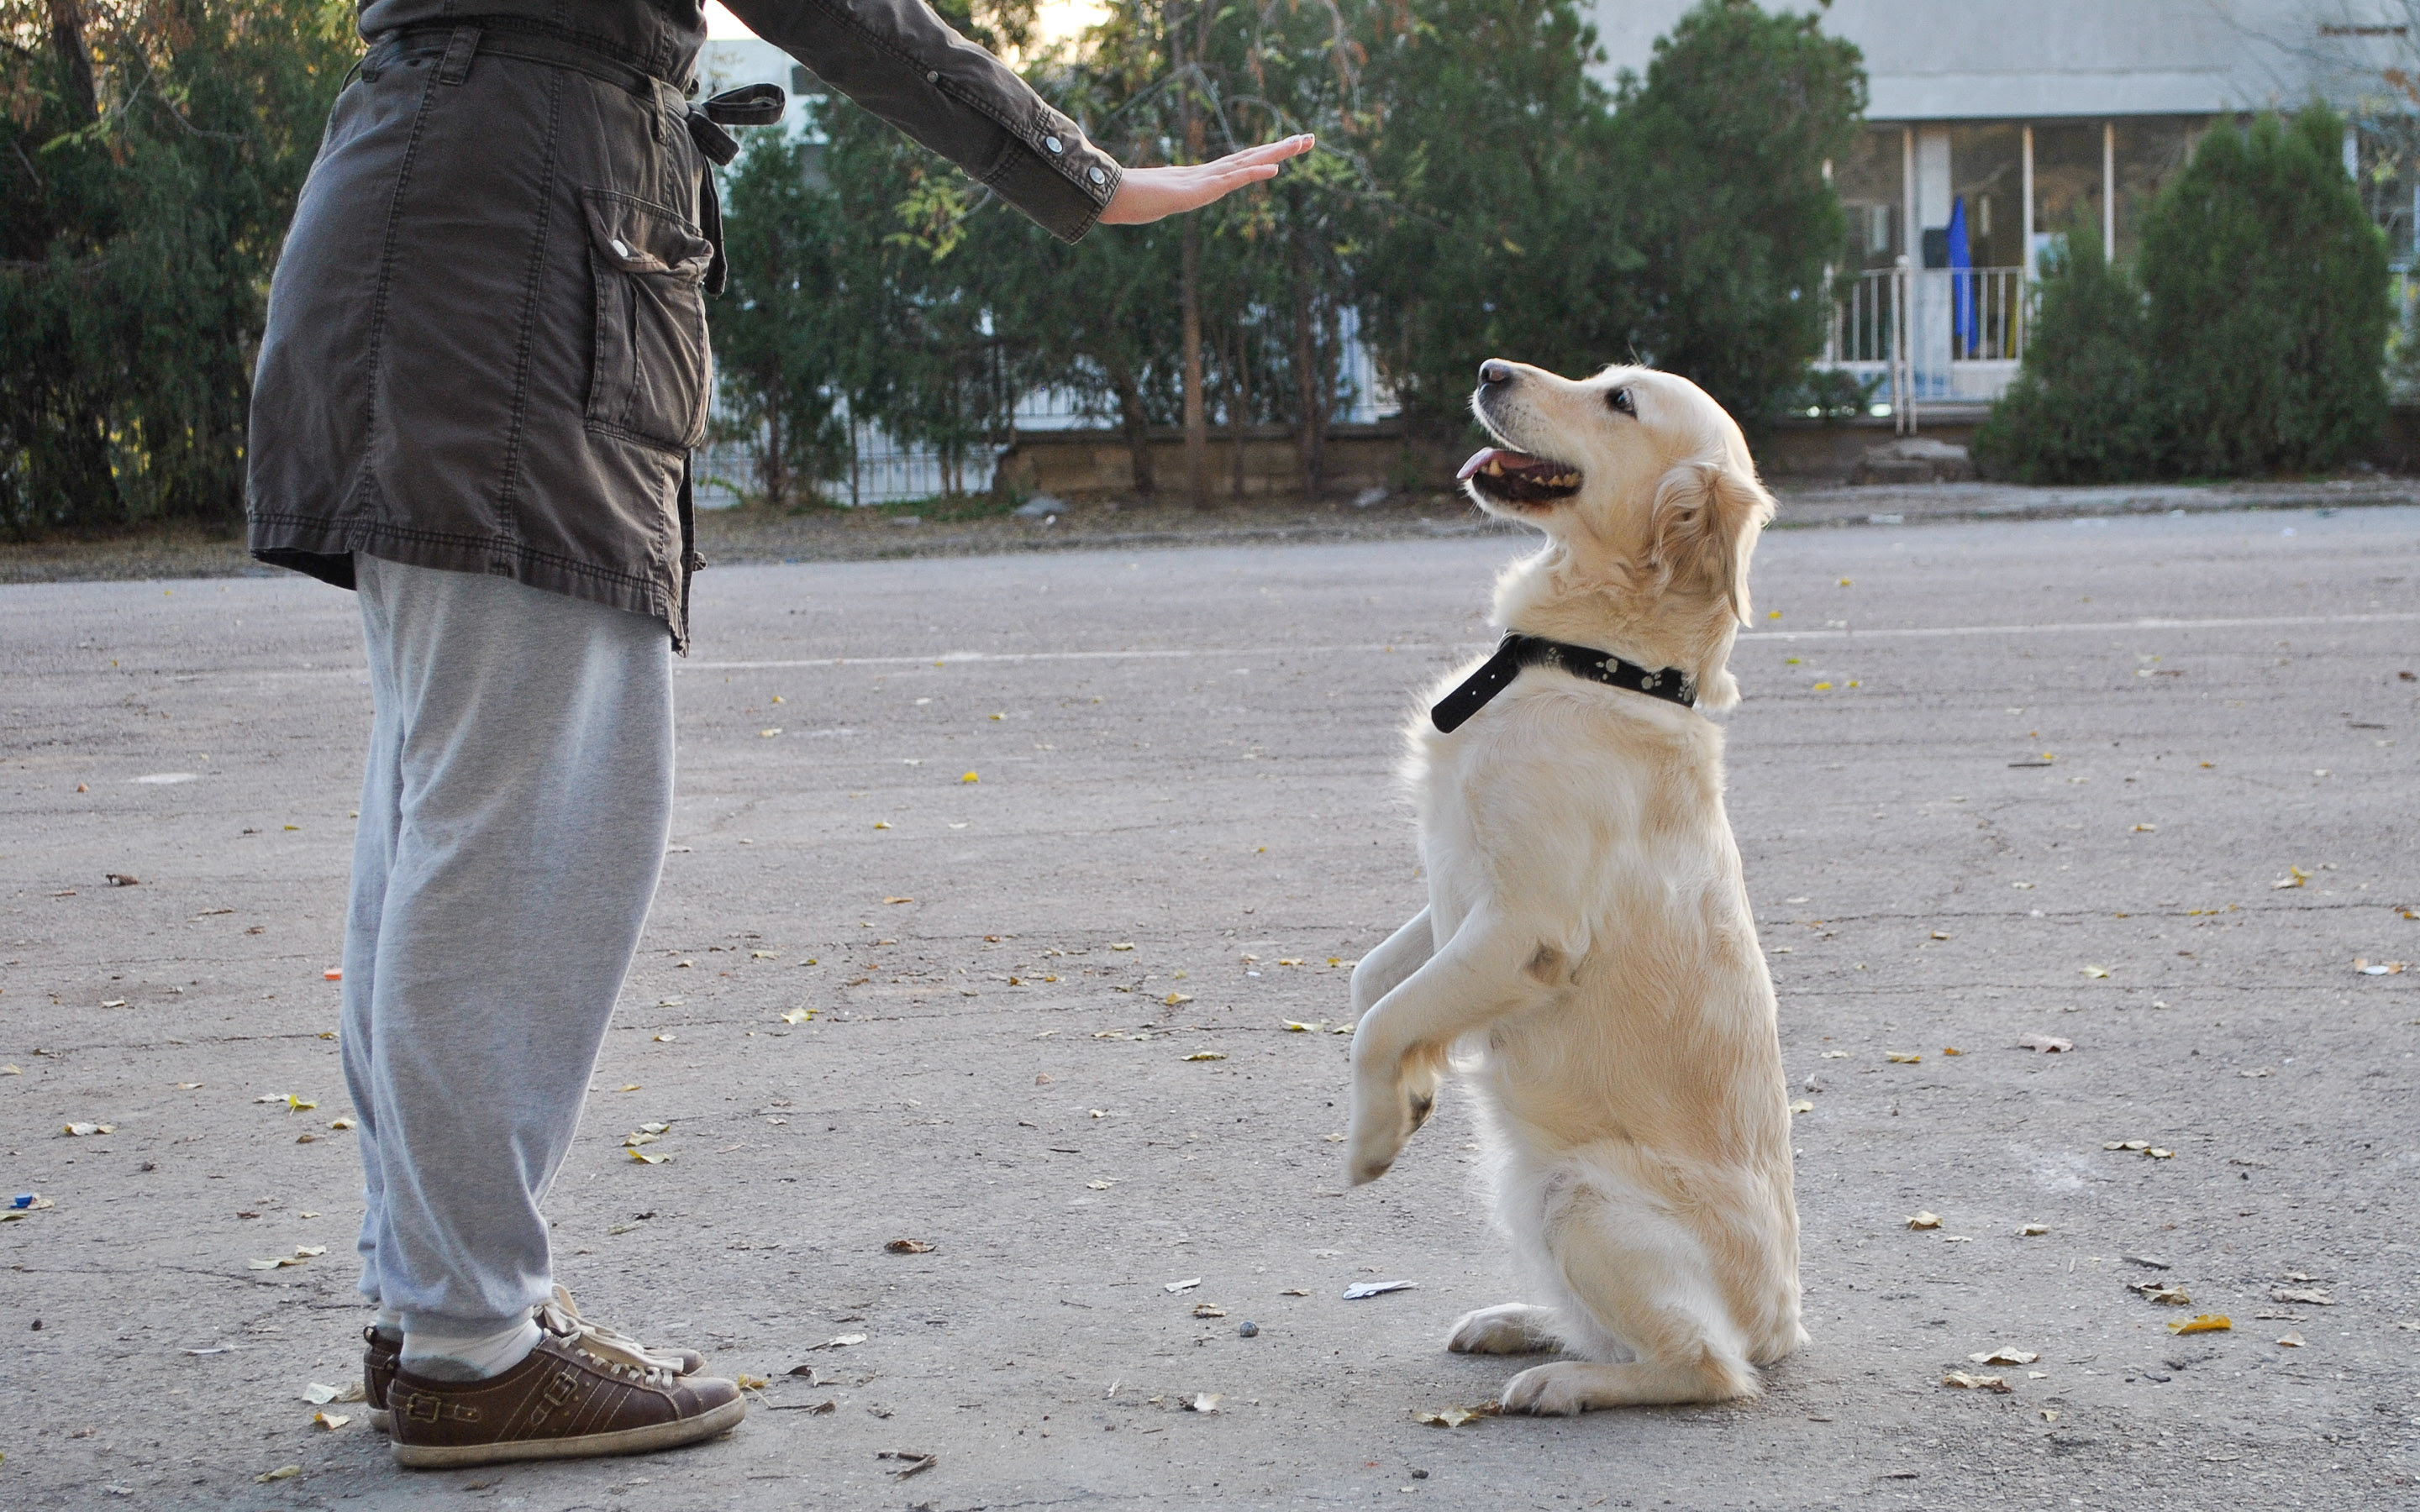 How to Become a Dog Trainer: 5 Steps - wikiHow